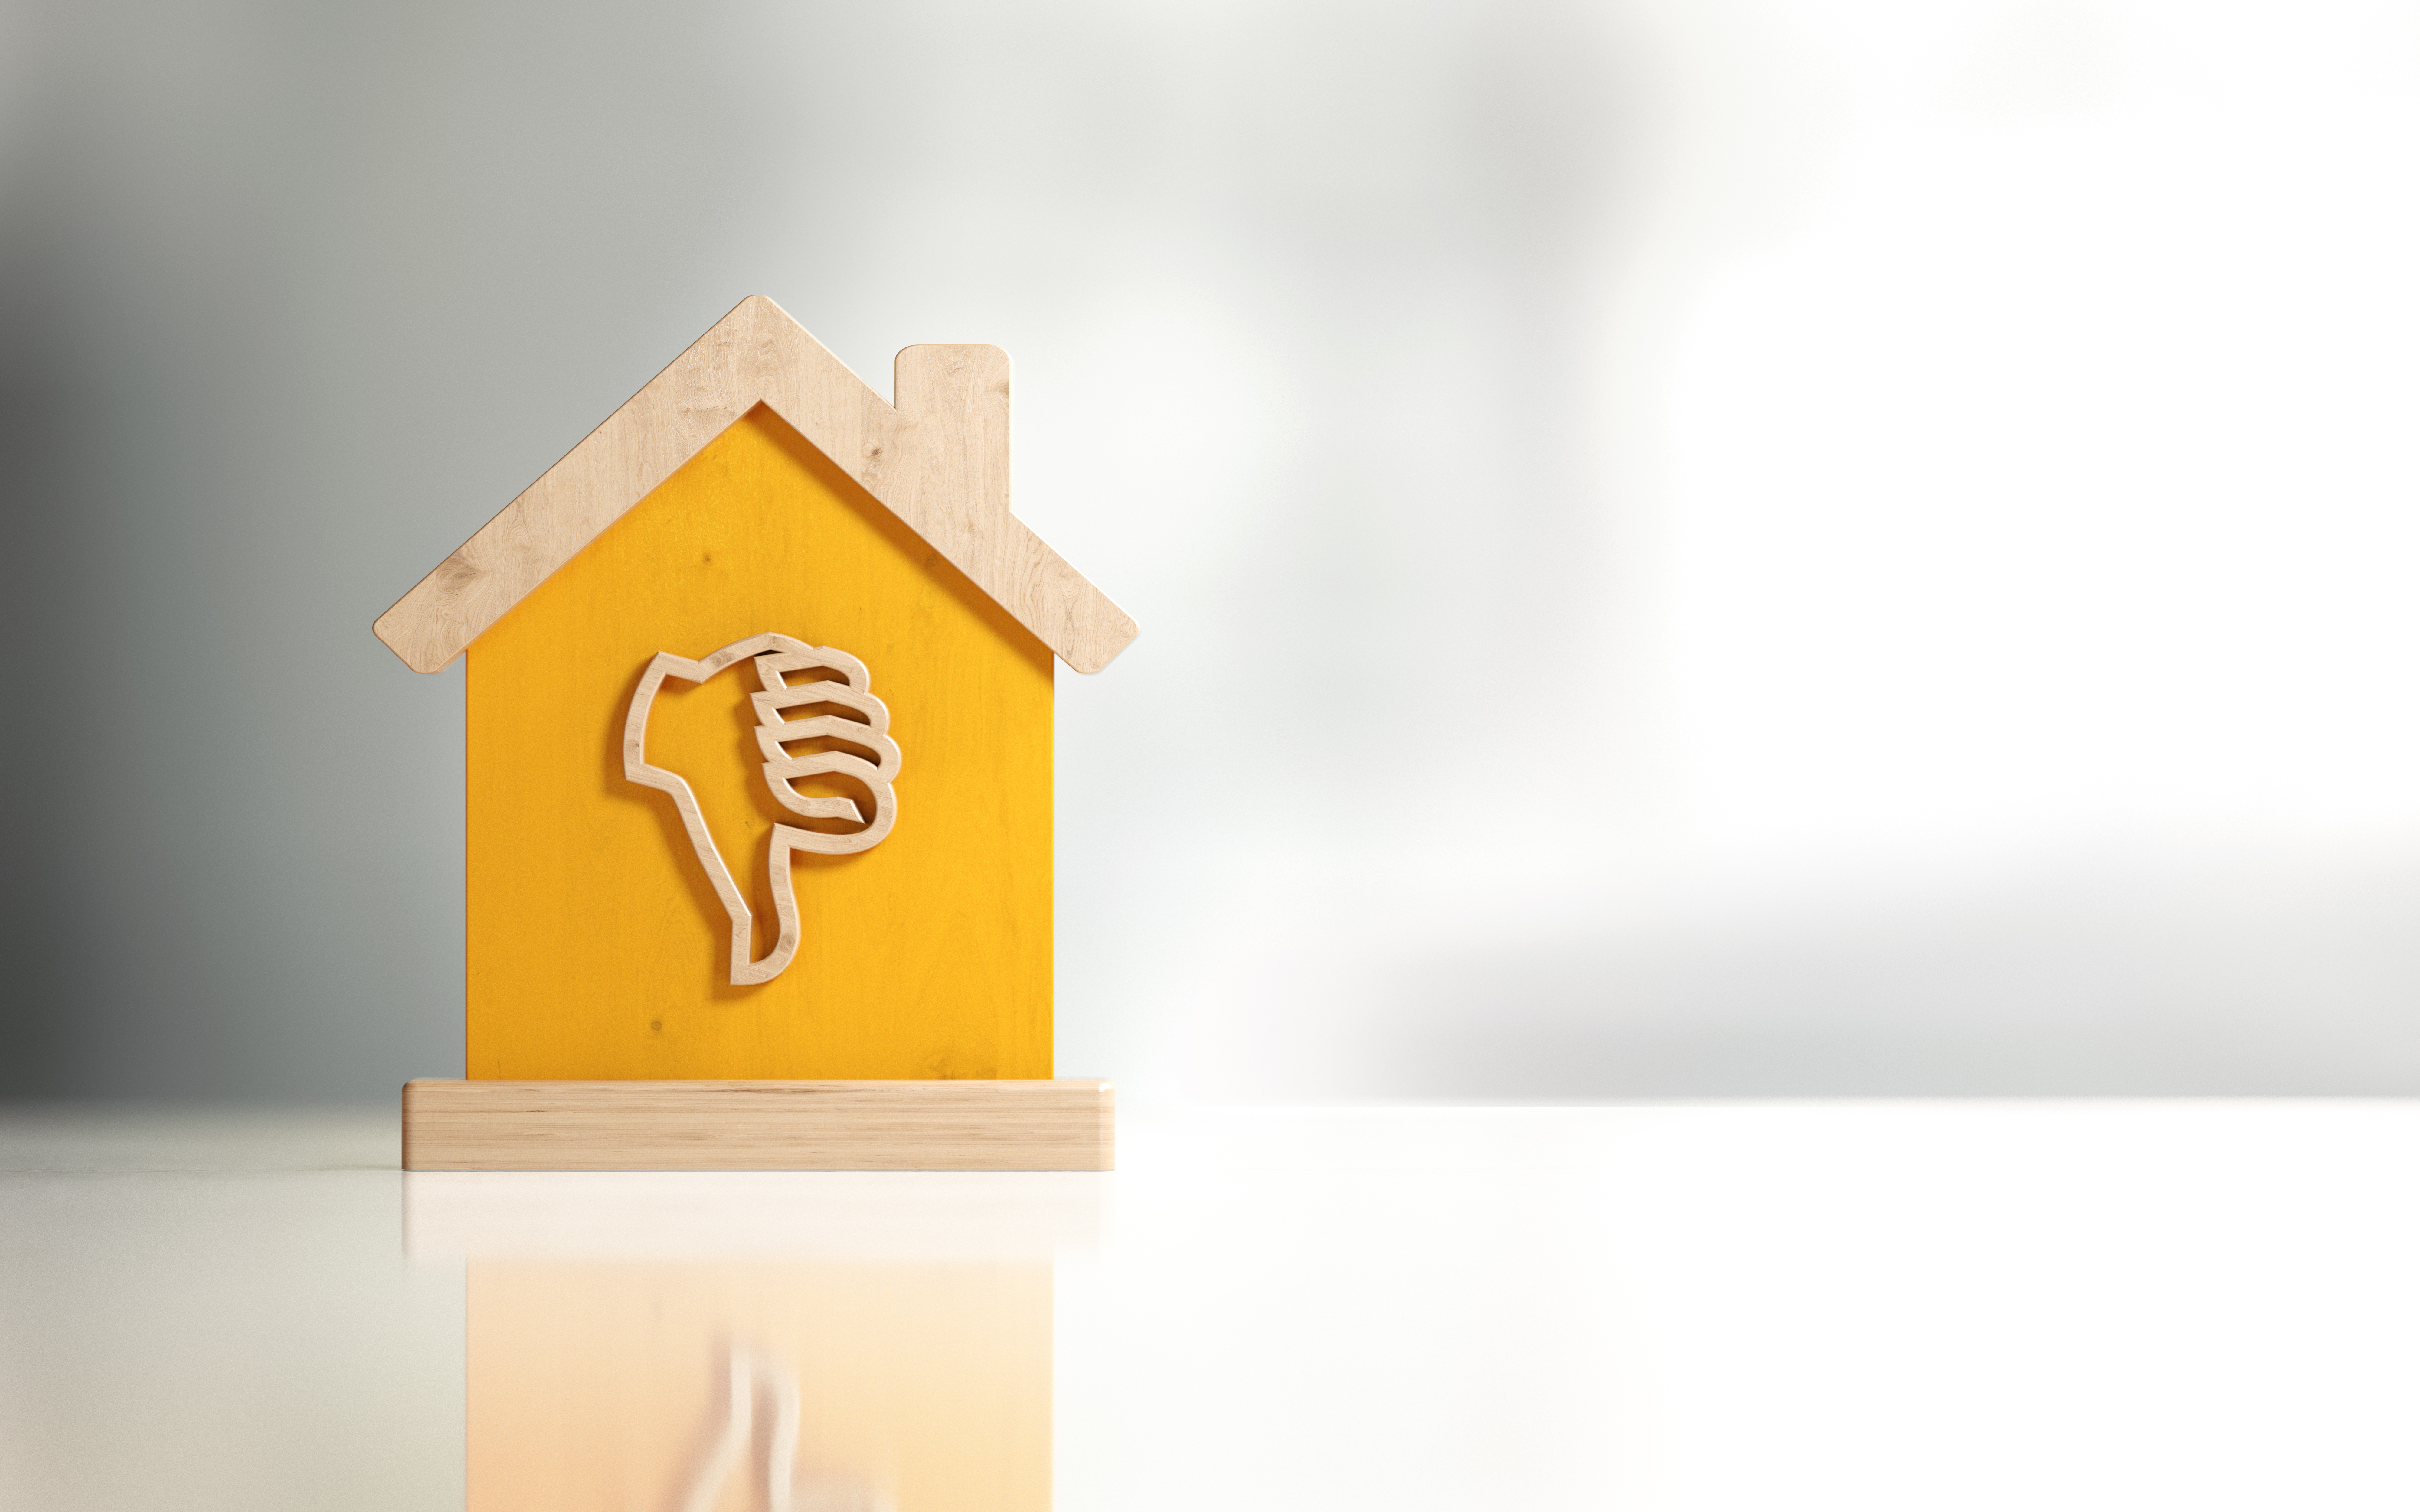 A wooden toy house with a thumbs-down symbol on it.